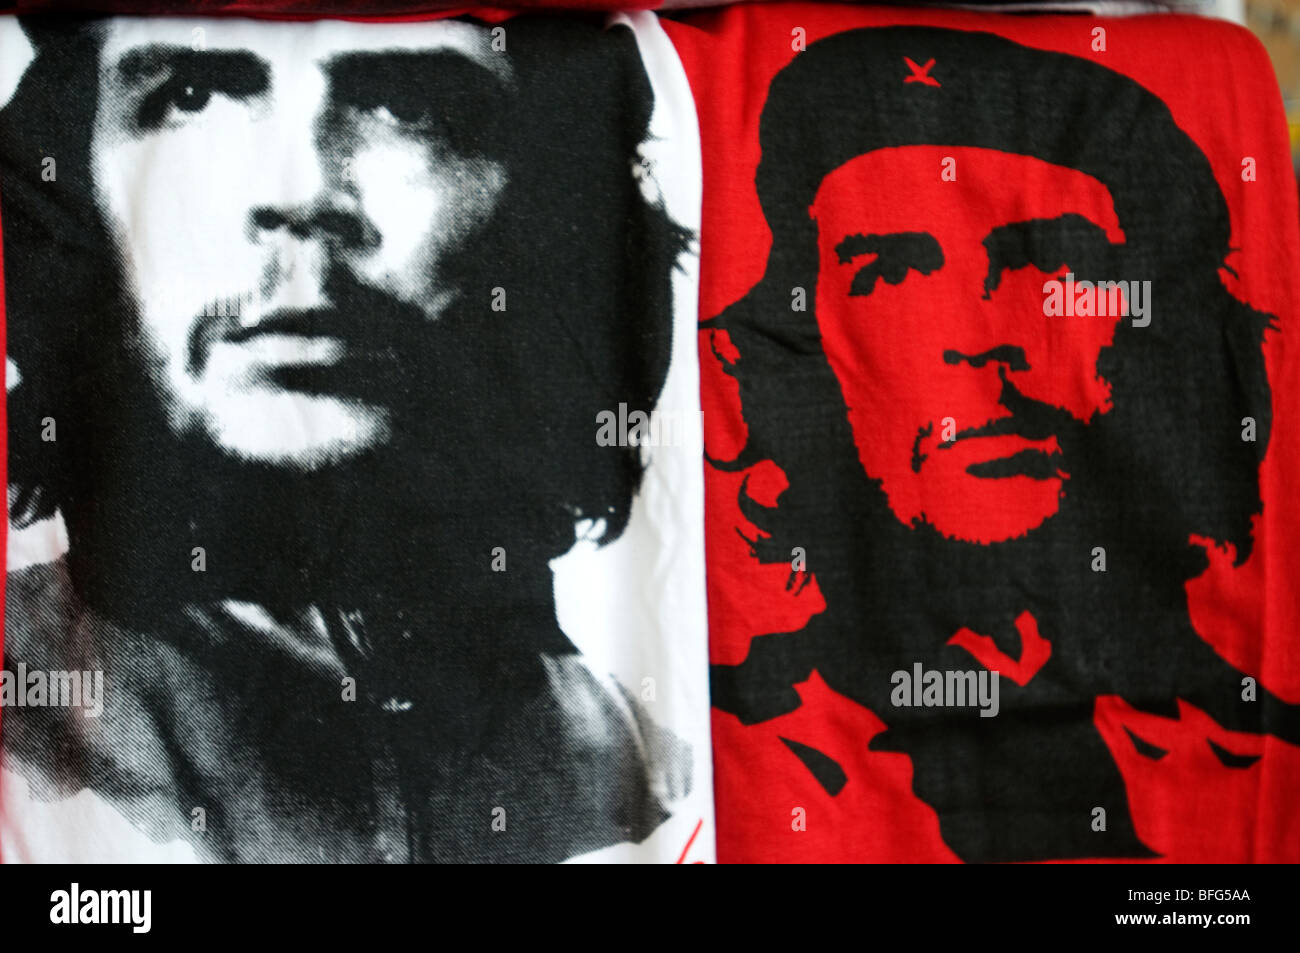 Souvenir t shirts with iconic Che Guevara image for sale in Cuba Stock Photo